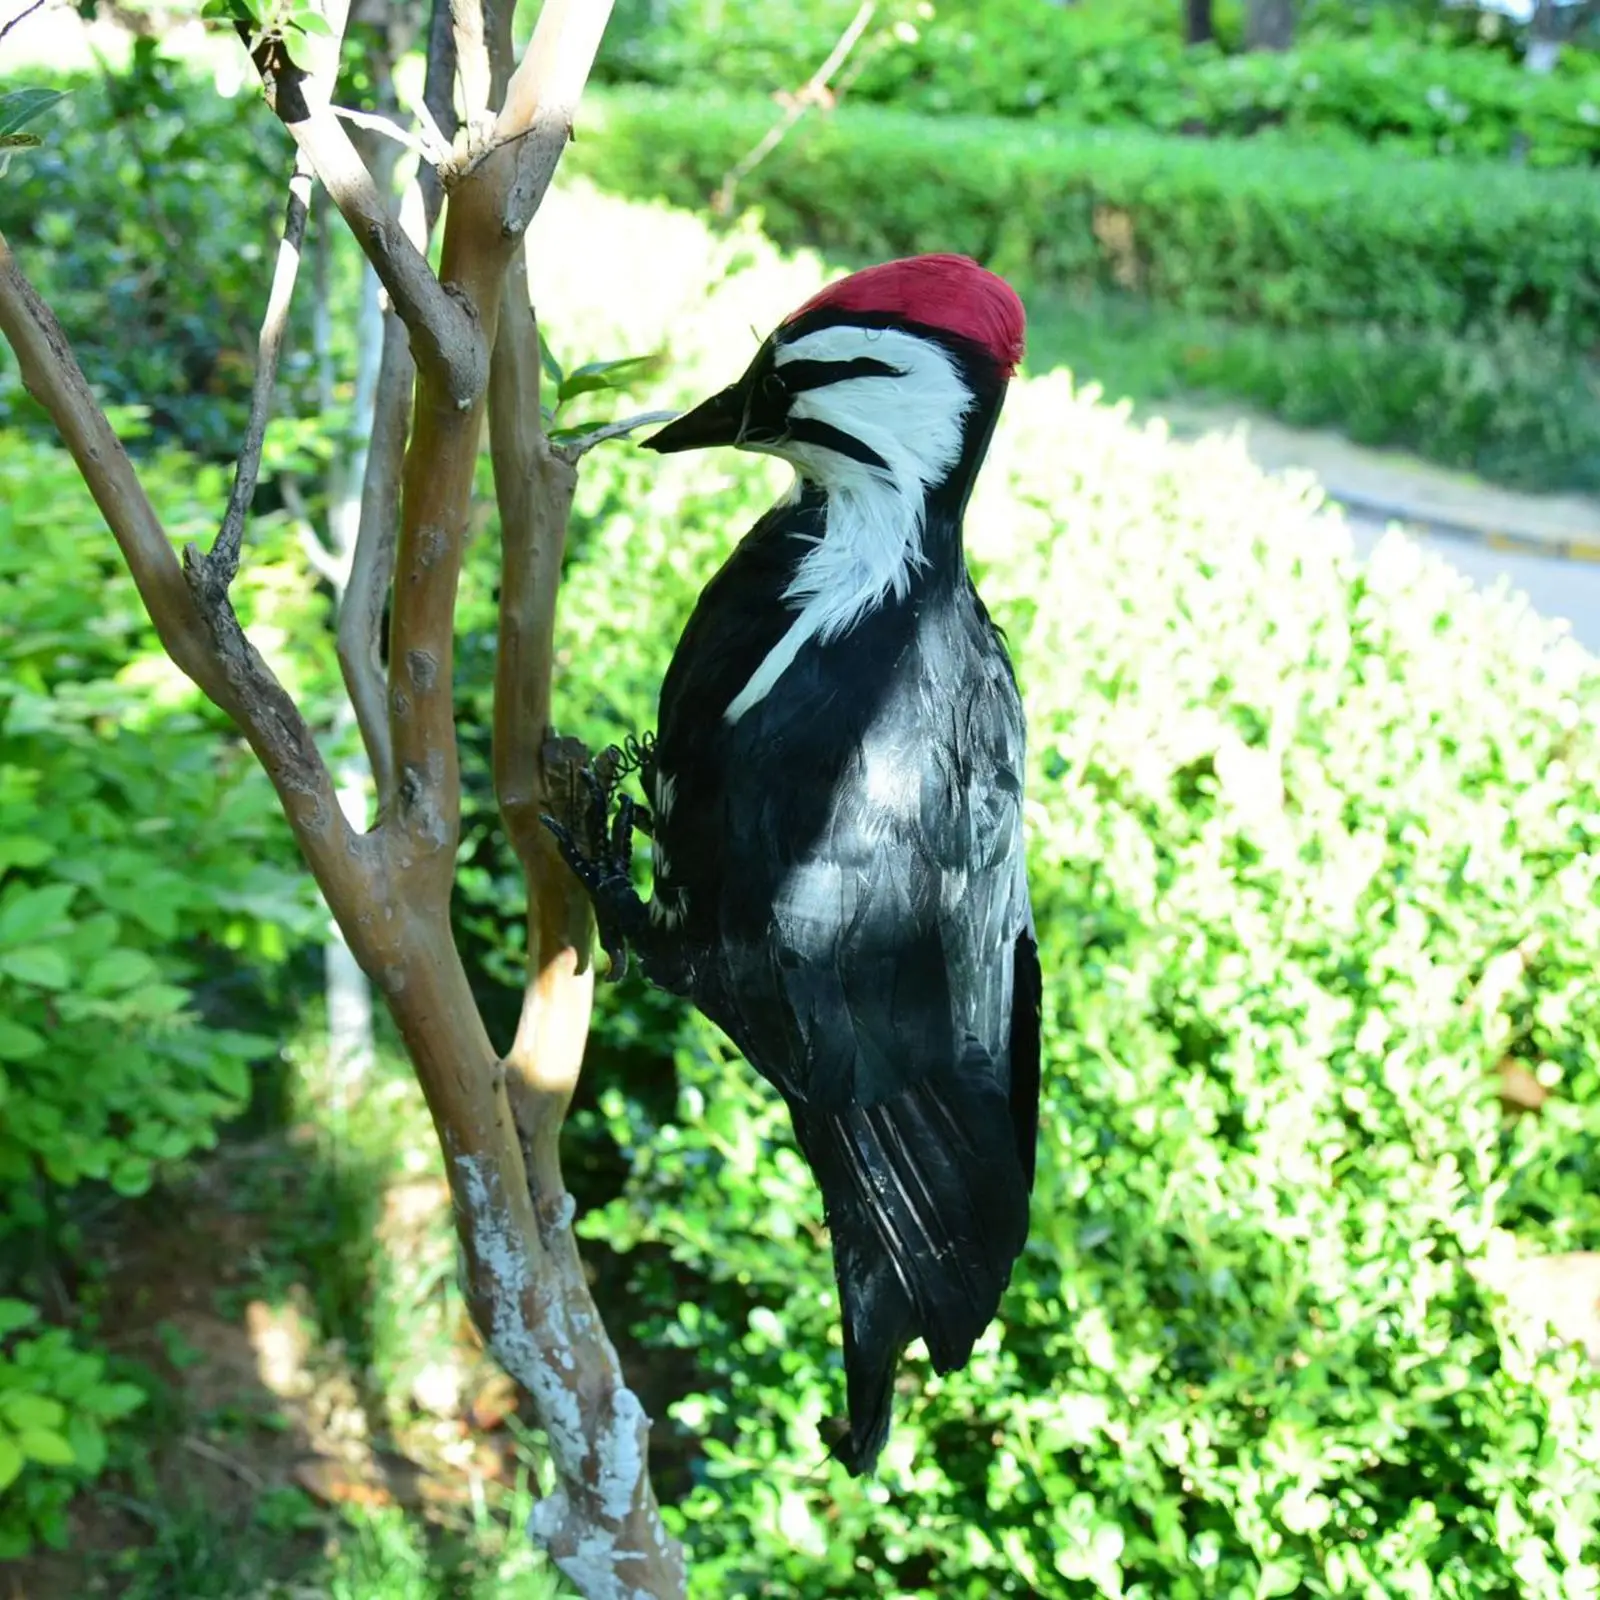 Simulation Woodpecker Handcrafted Toys Scarecrow Gift Spring Art Faux Sculpture Model for Yard Outdoor Home Decoration Ornament